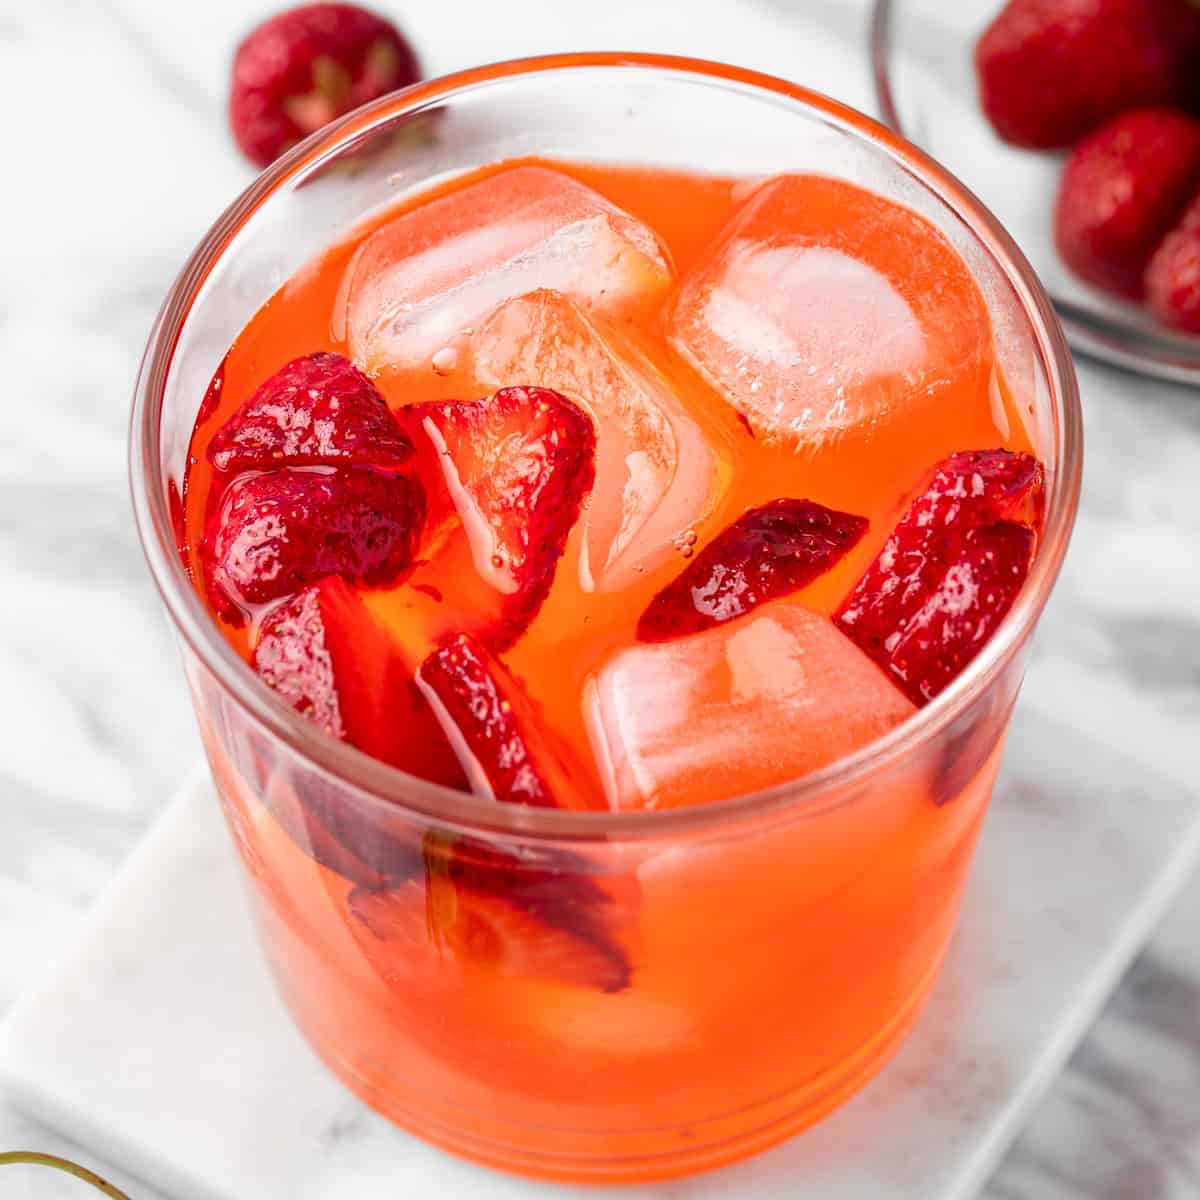 A Henny Hustle cocktail garnished with fresh strawberry slices.